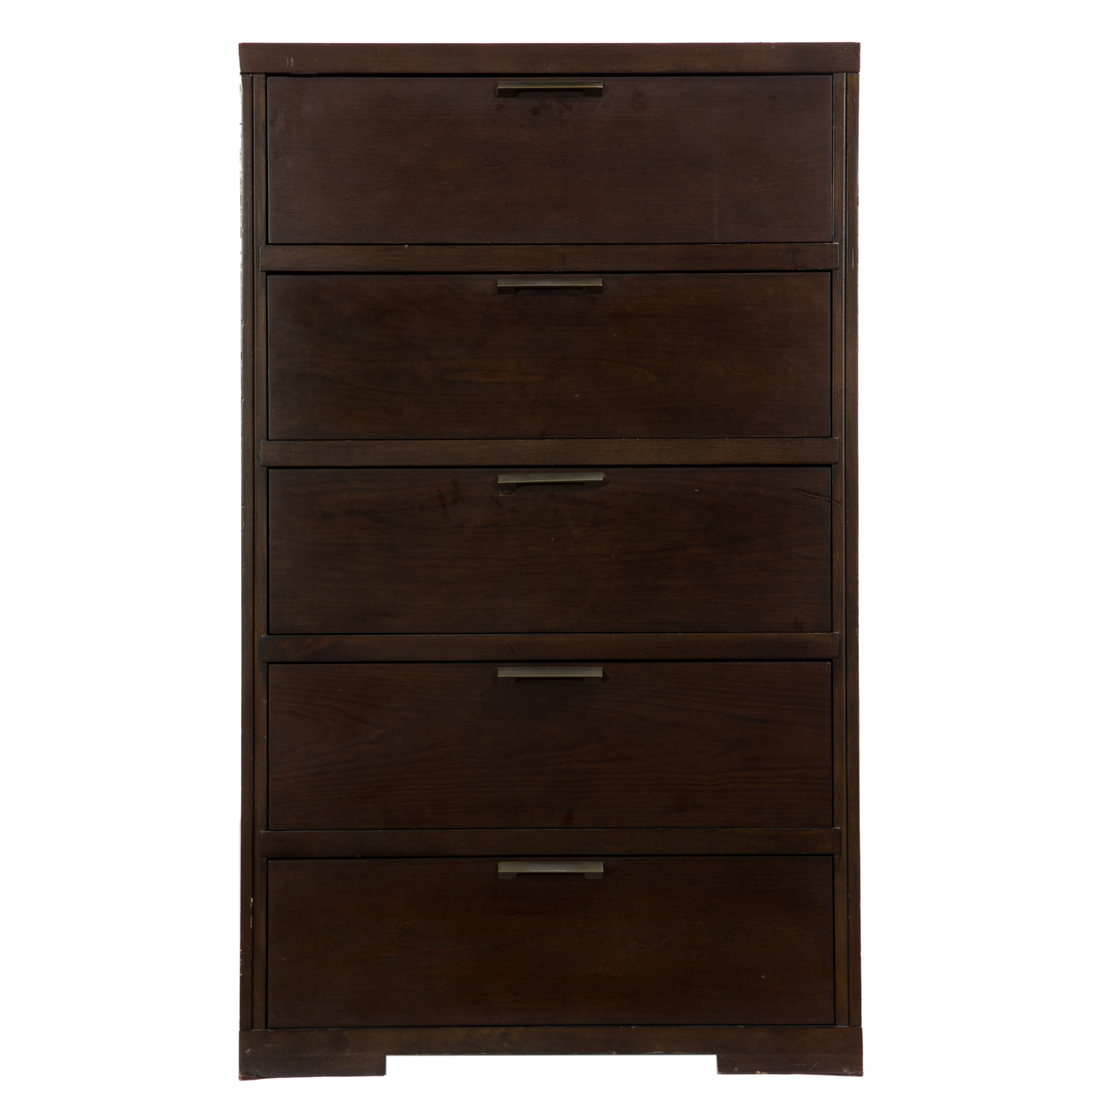 A CONTEMPORARY TALL CHEST OF DRAWERS